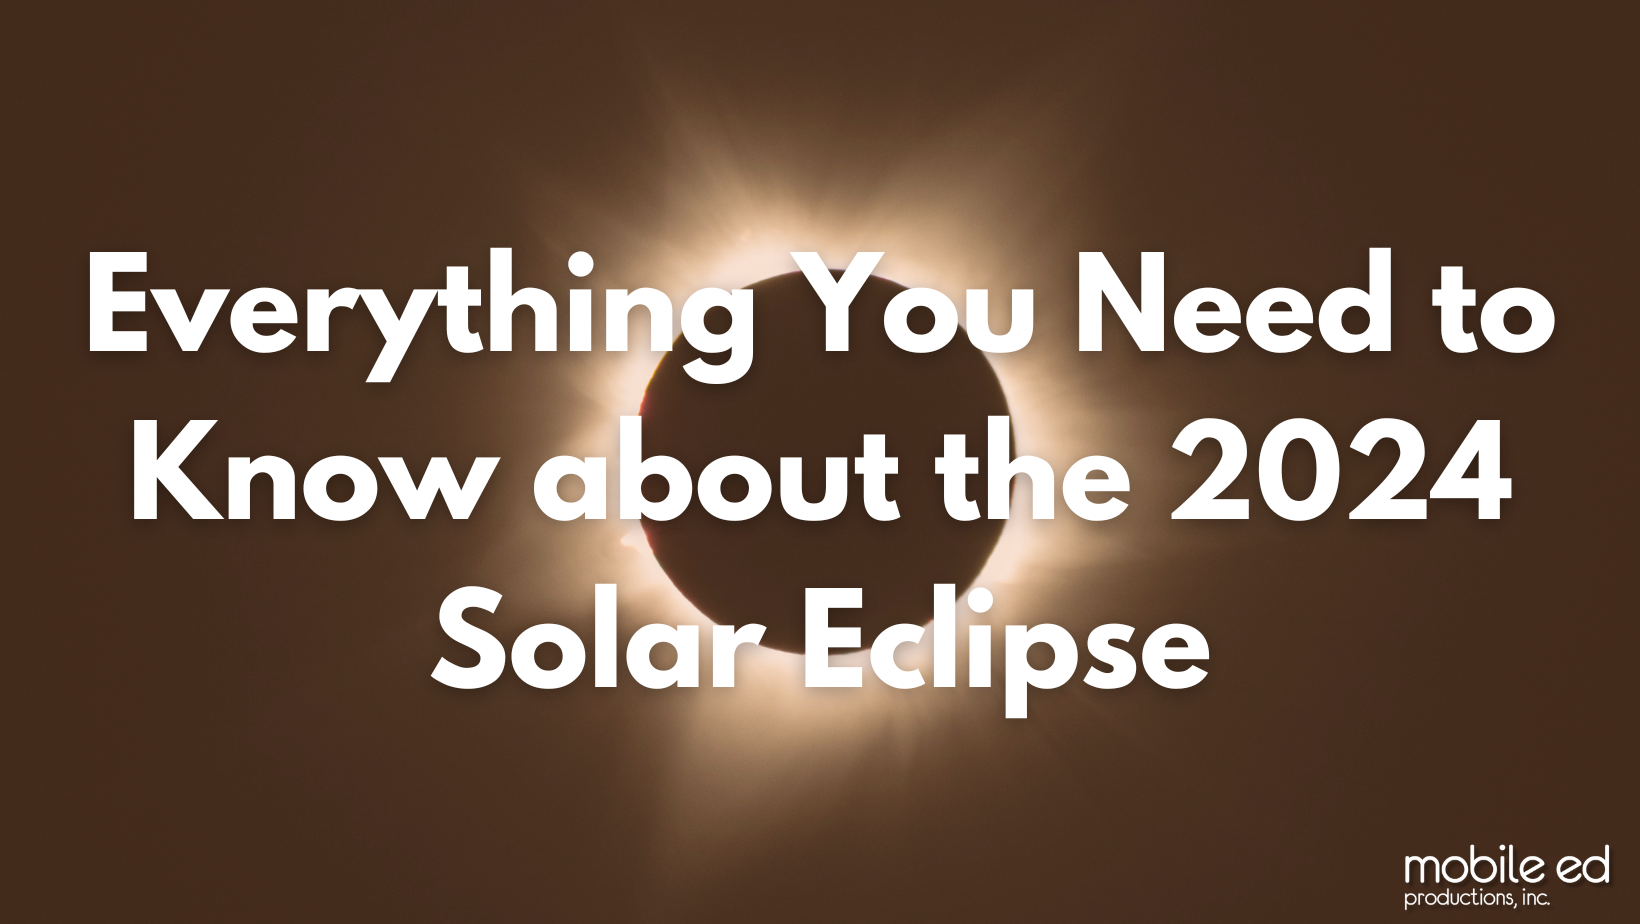 Everything You Need to Know About the 2024 Solar Eclipse